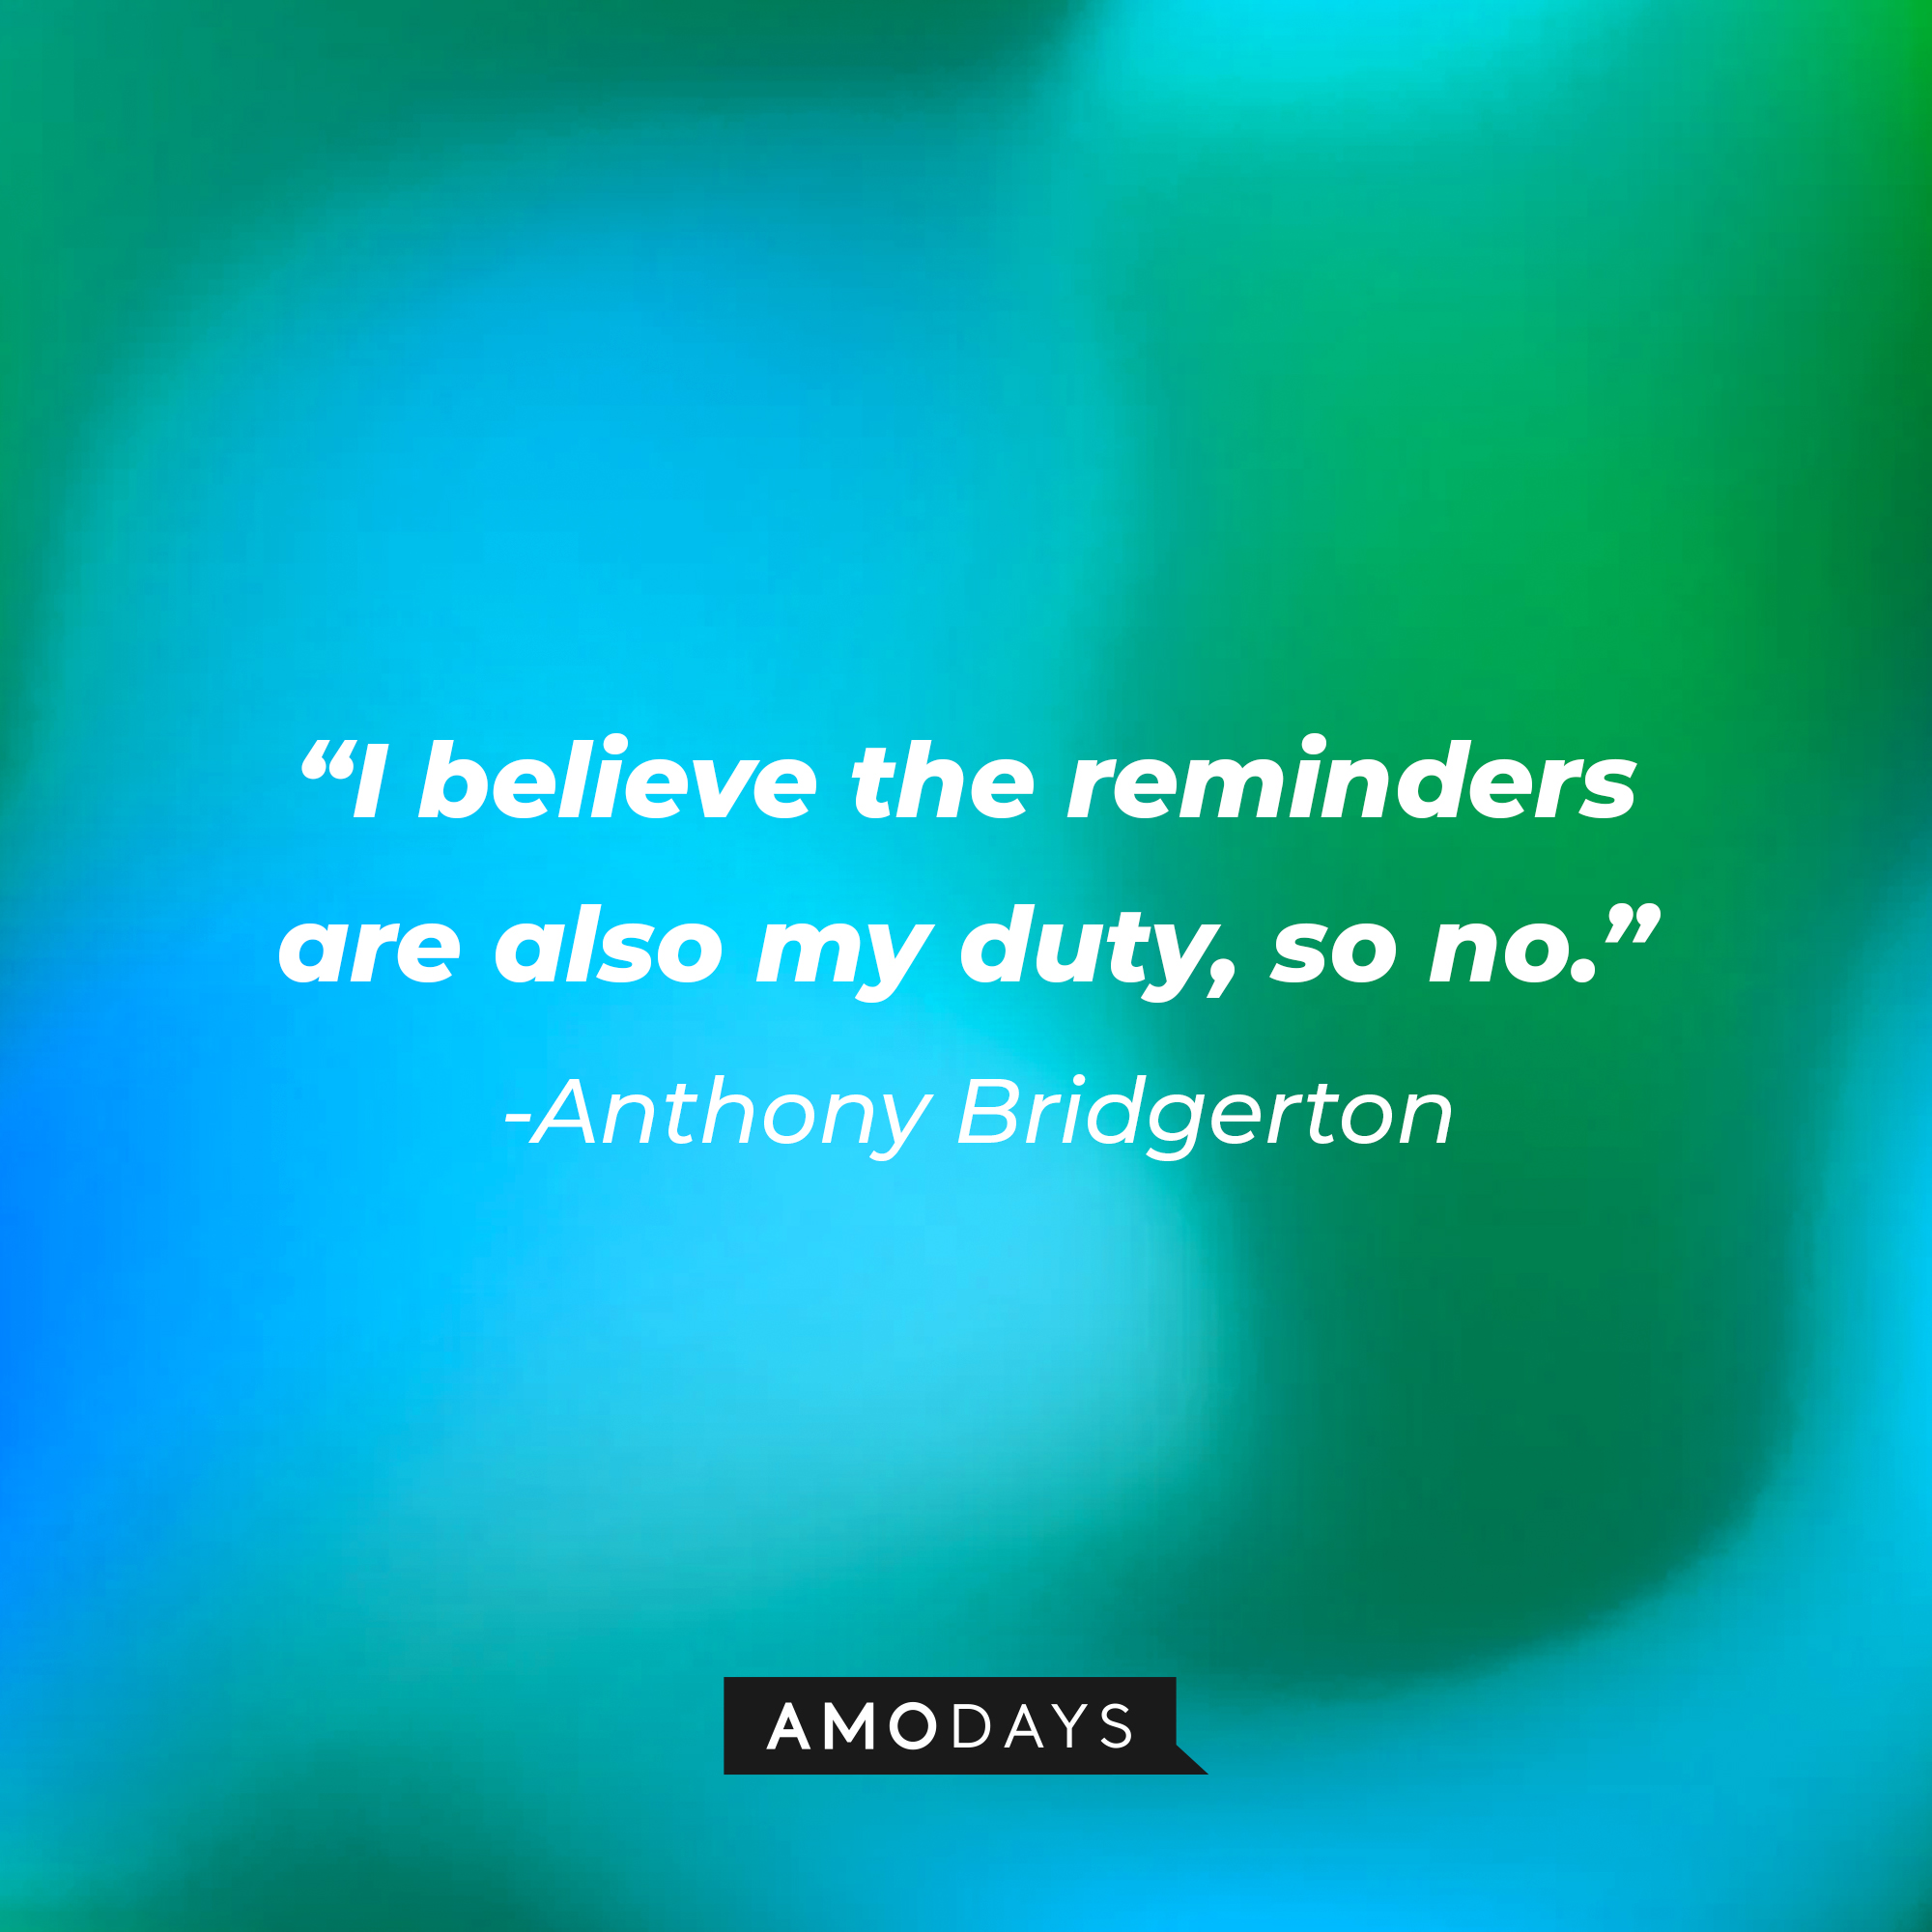 Anthony Bridgerton's quote: "I believe the reminders are also my duty, so no." | Source: AmoDays